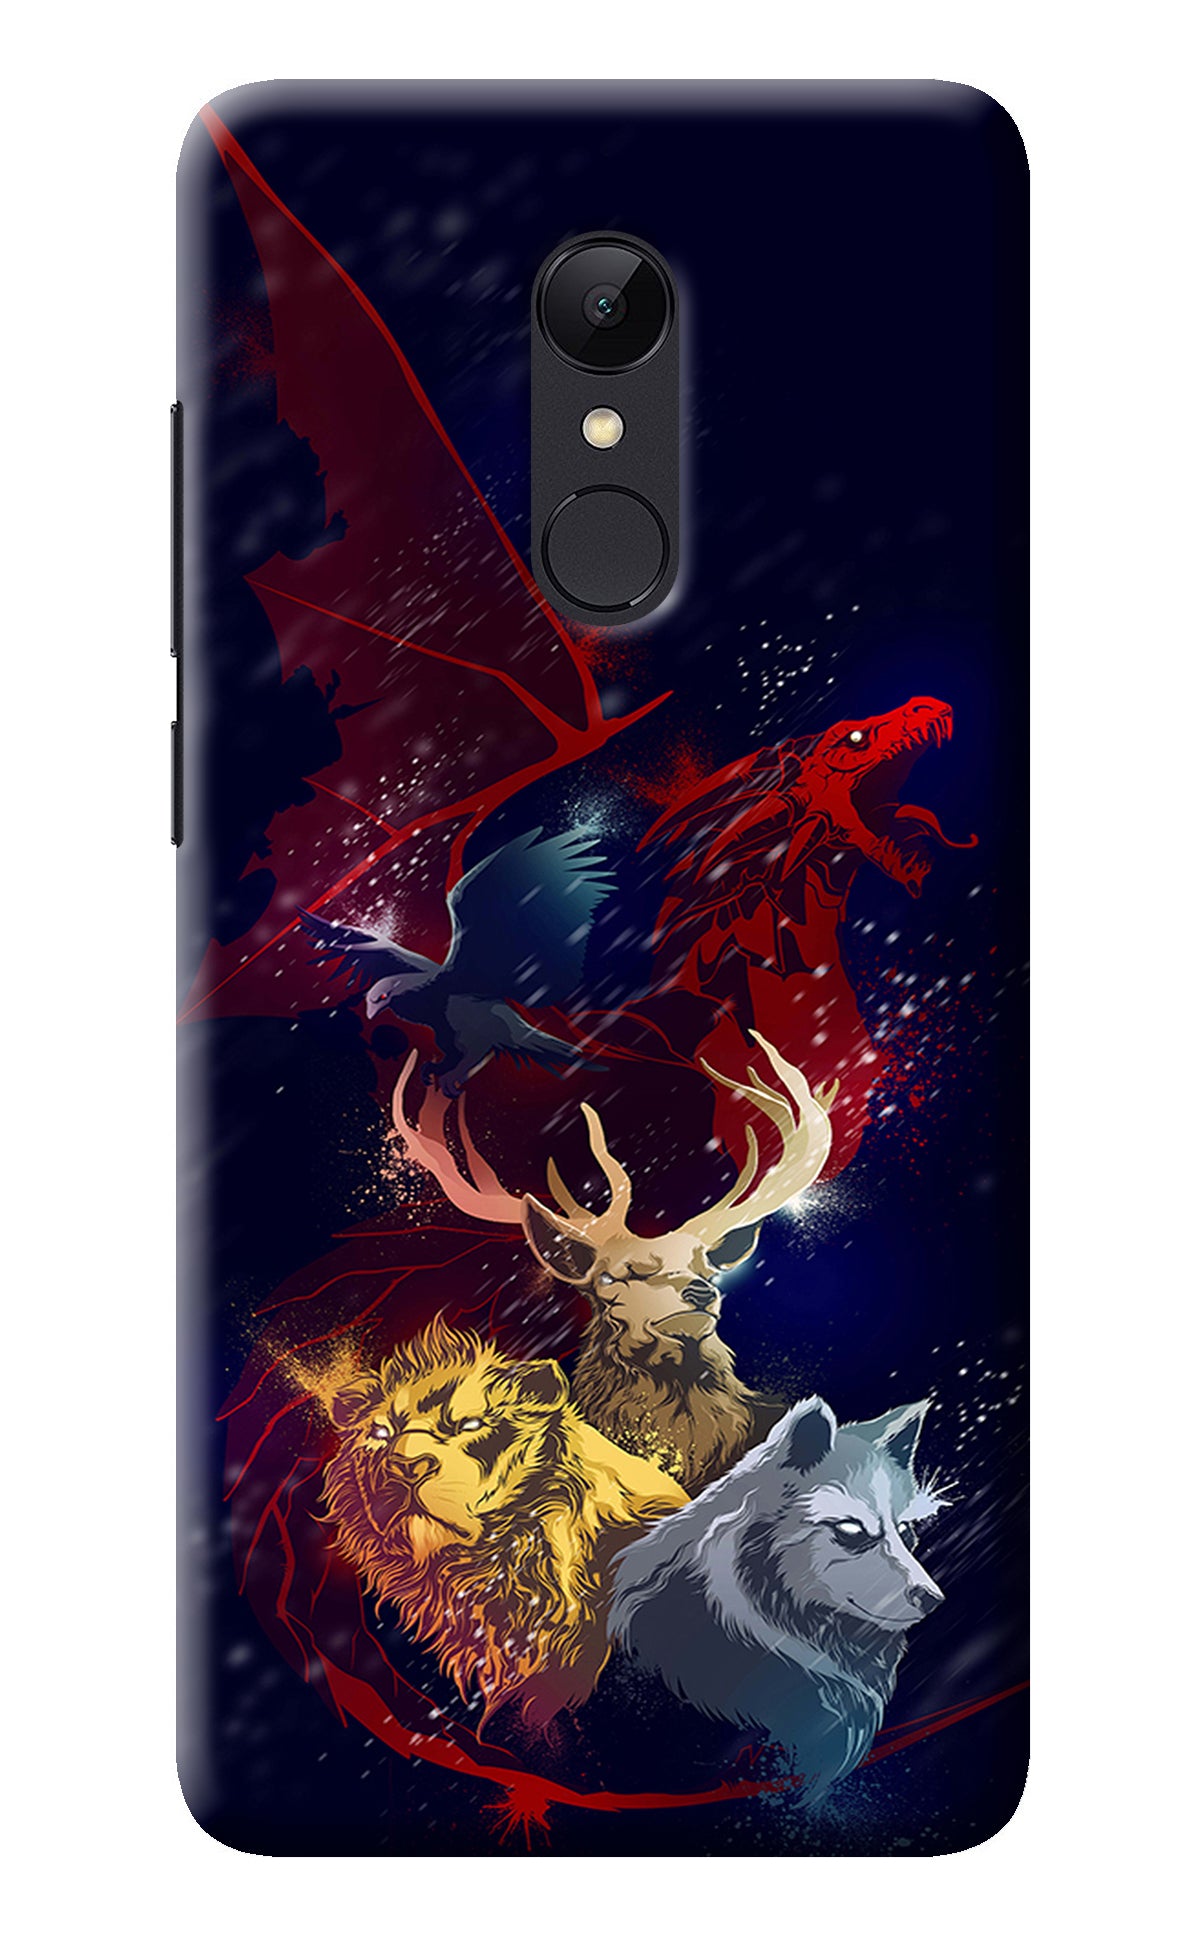 Game Of Thrones Redmi Note 5 Back Cover